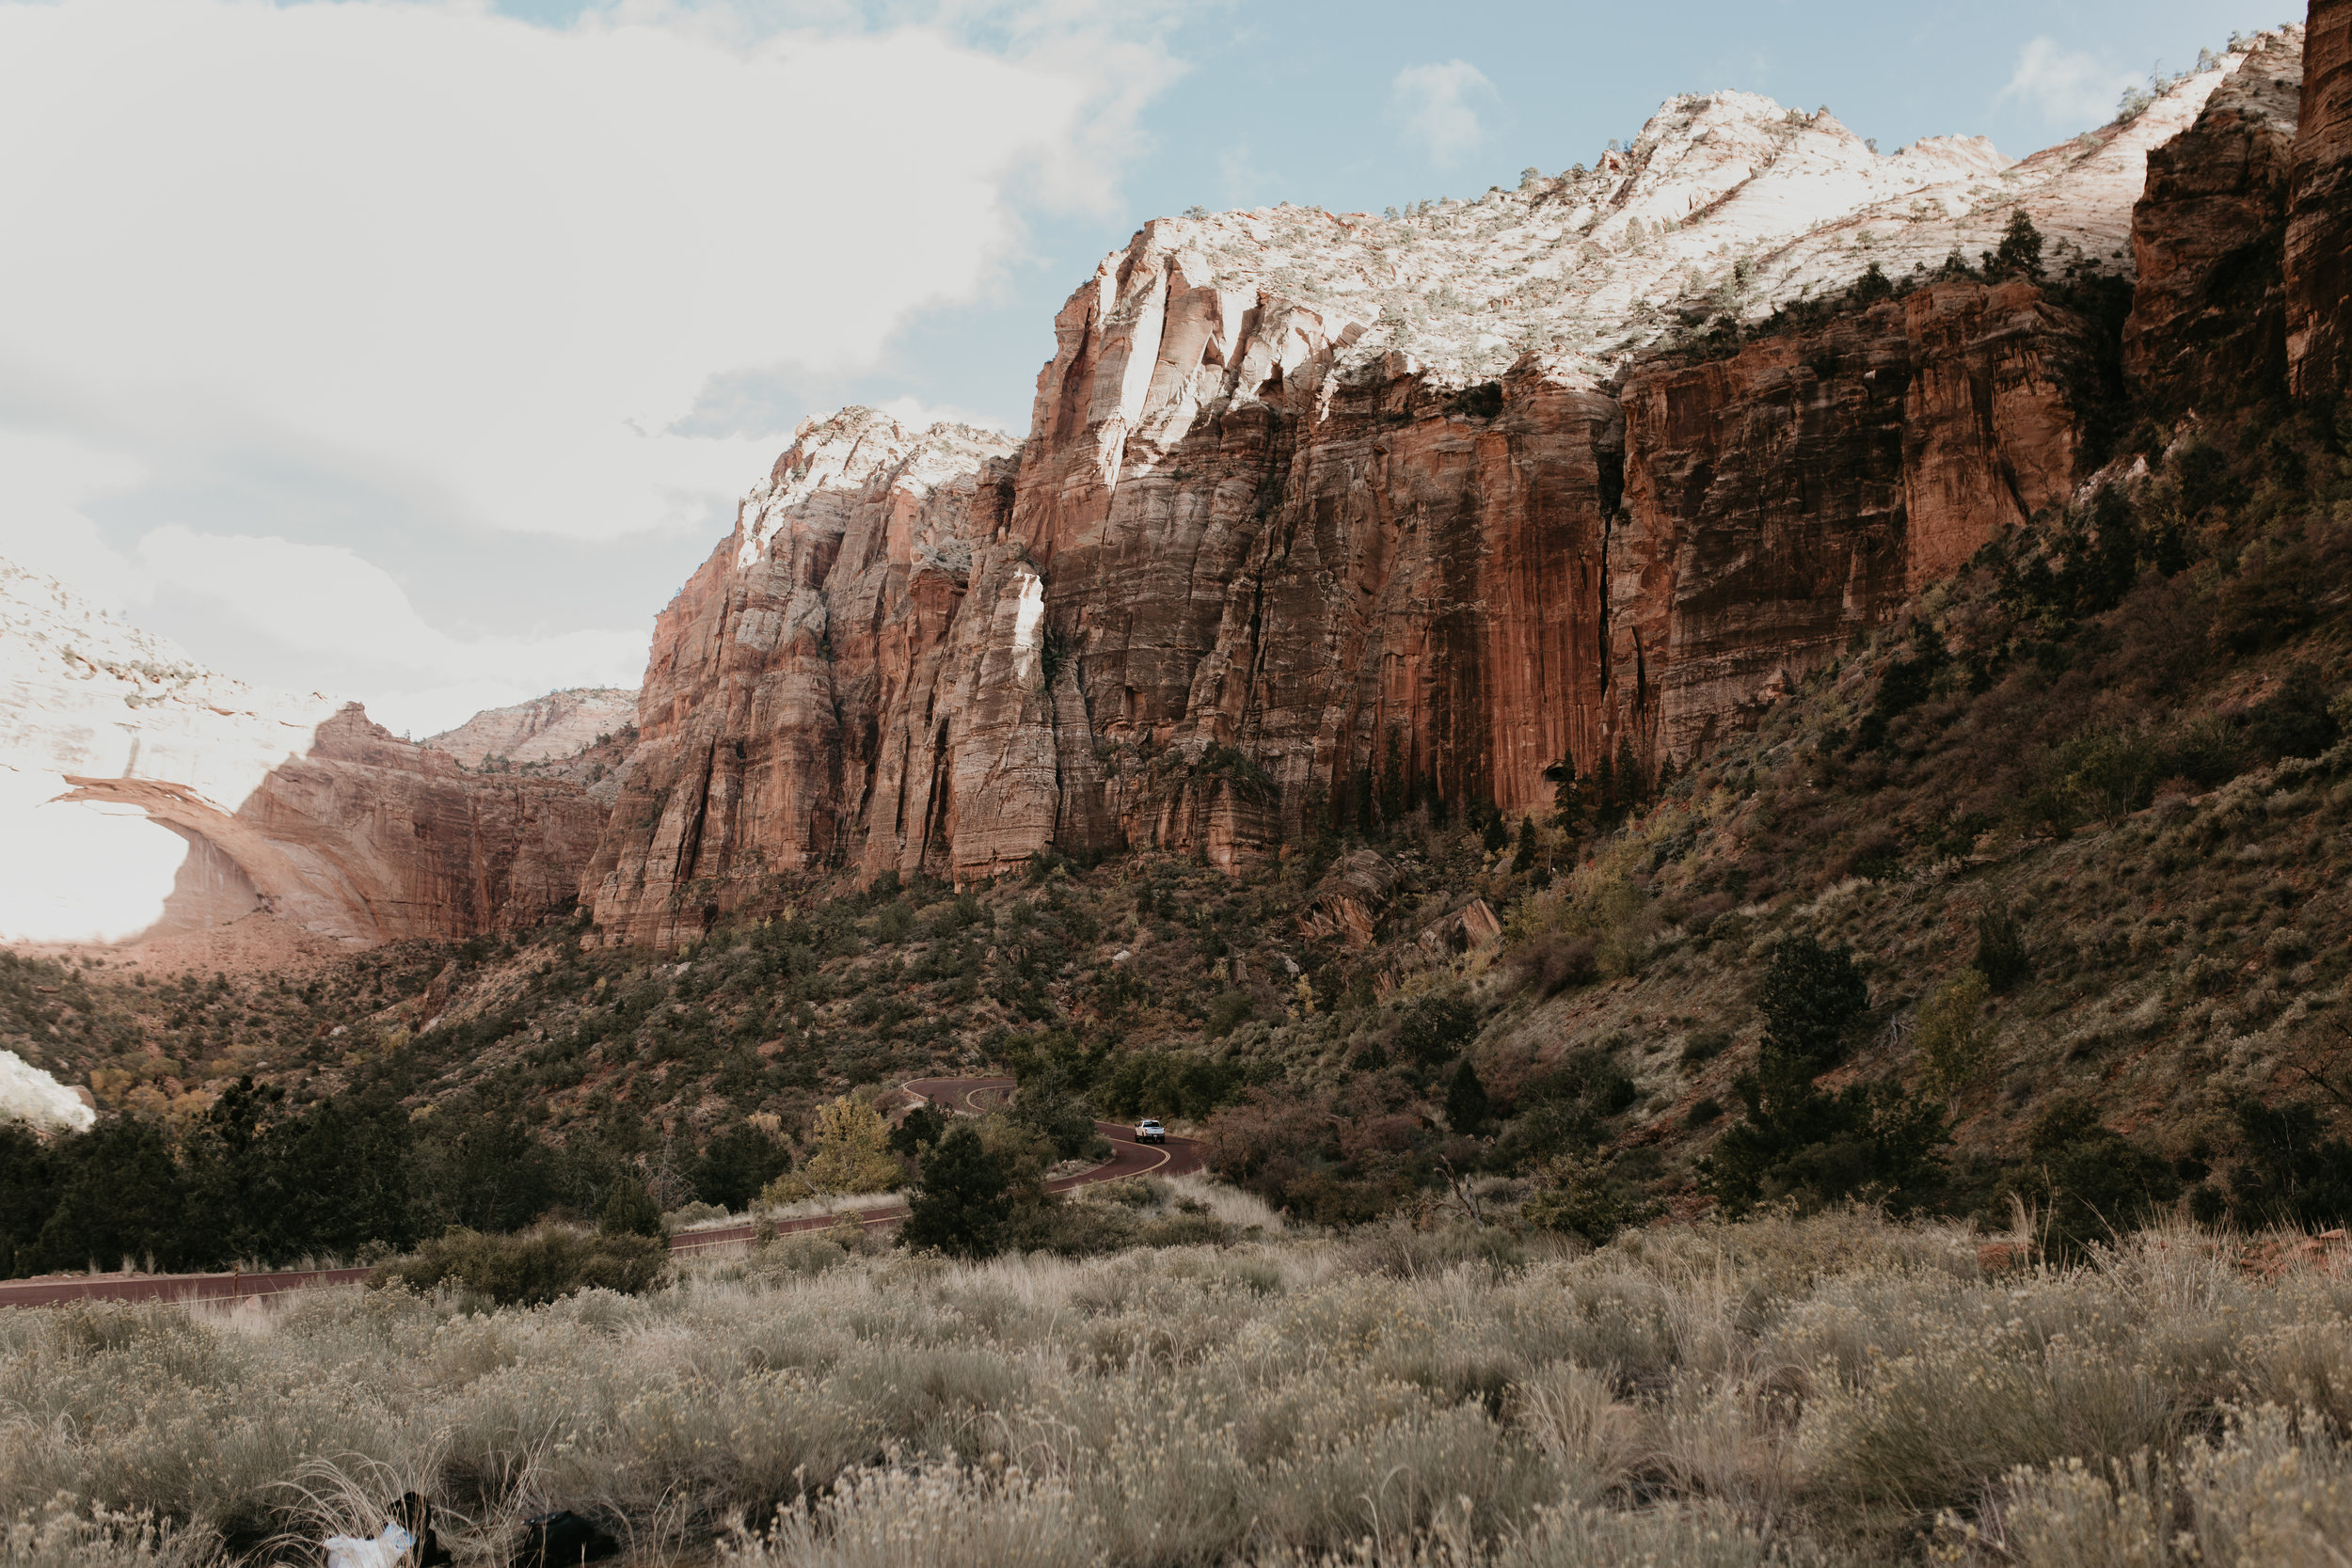 nicole-daacke-photography-zion-national-park-elopement-photographer-canyon-overlook-trail-elope-hiking-adventure-wedding-photos-fall-utah-red-rock-canyon-stgeorge-eloping-photographer-12.jpg